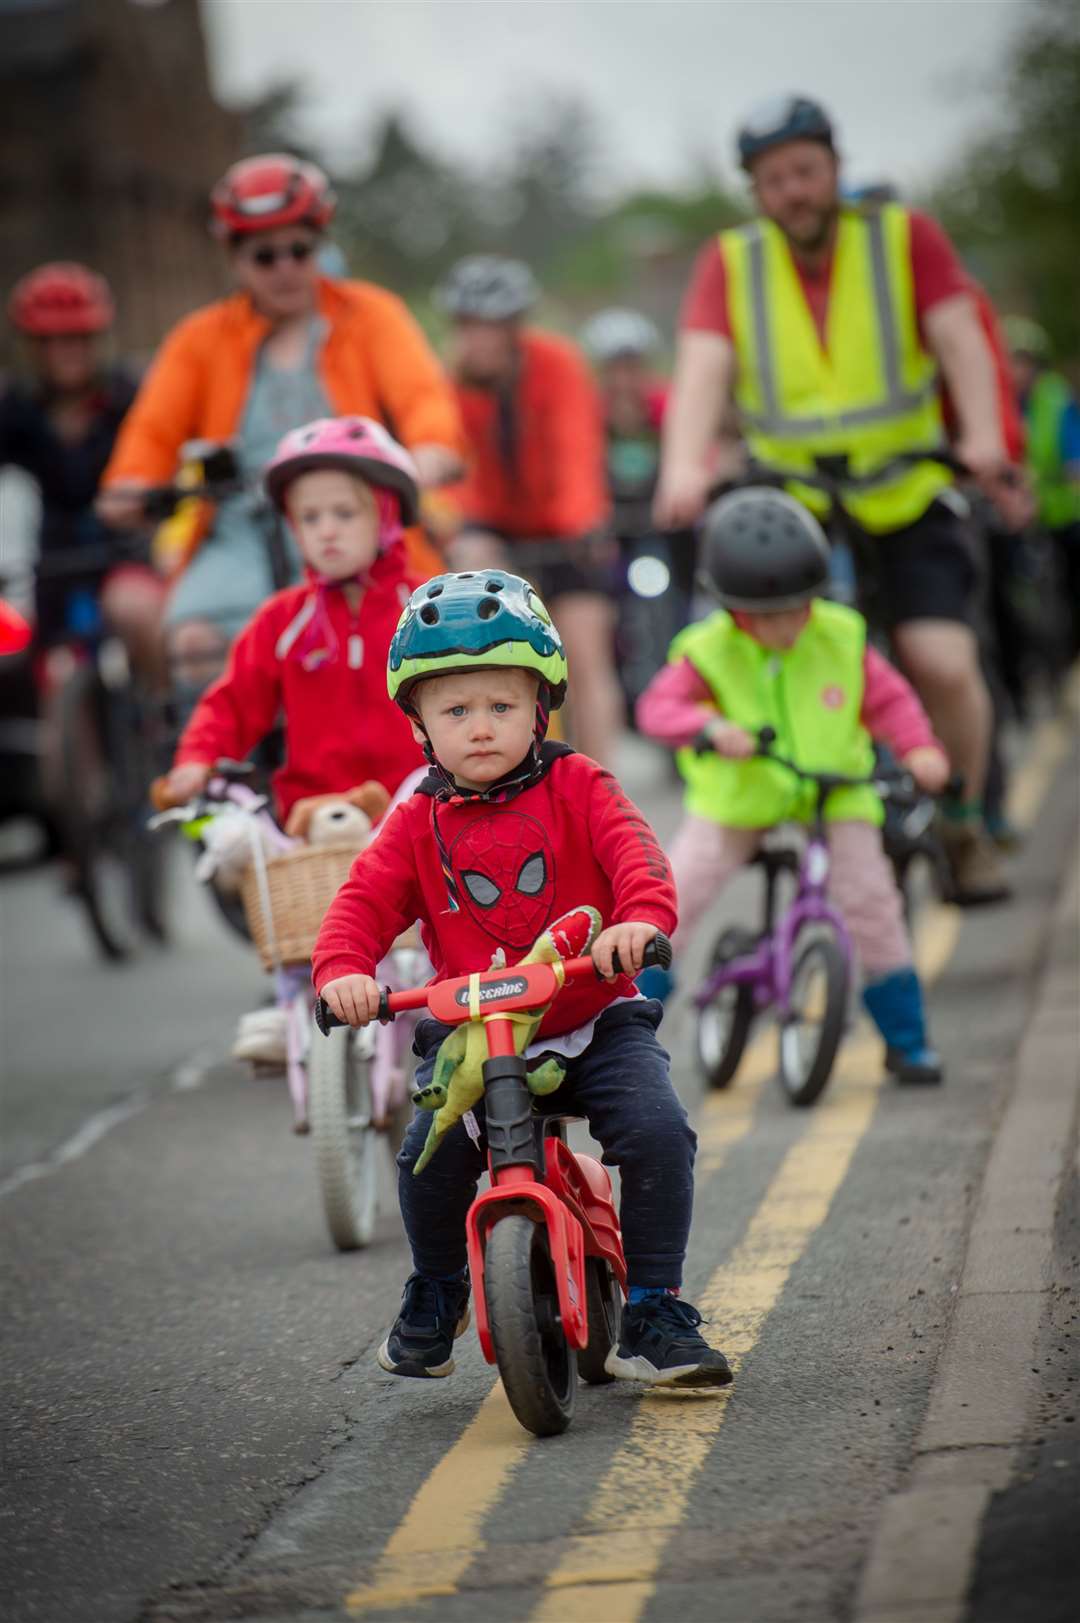 Balance bikes and more could be seen riding through Inverness. Picture: Callum Mackay